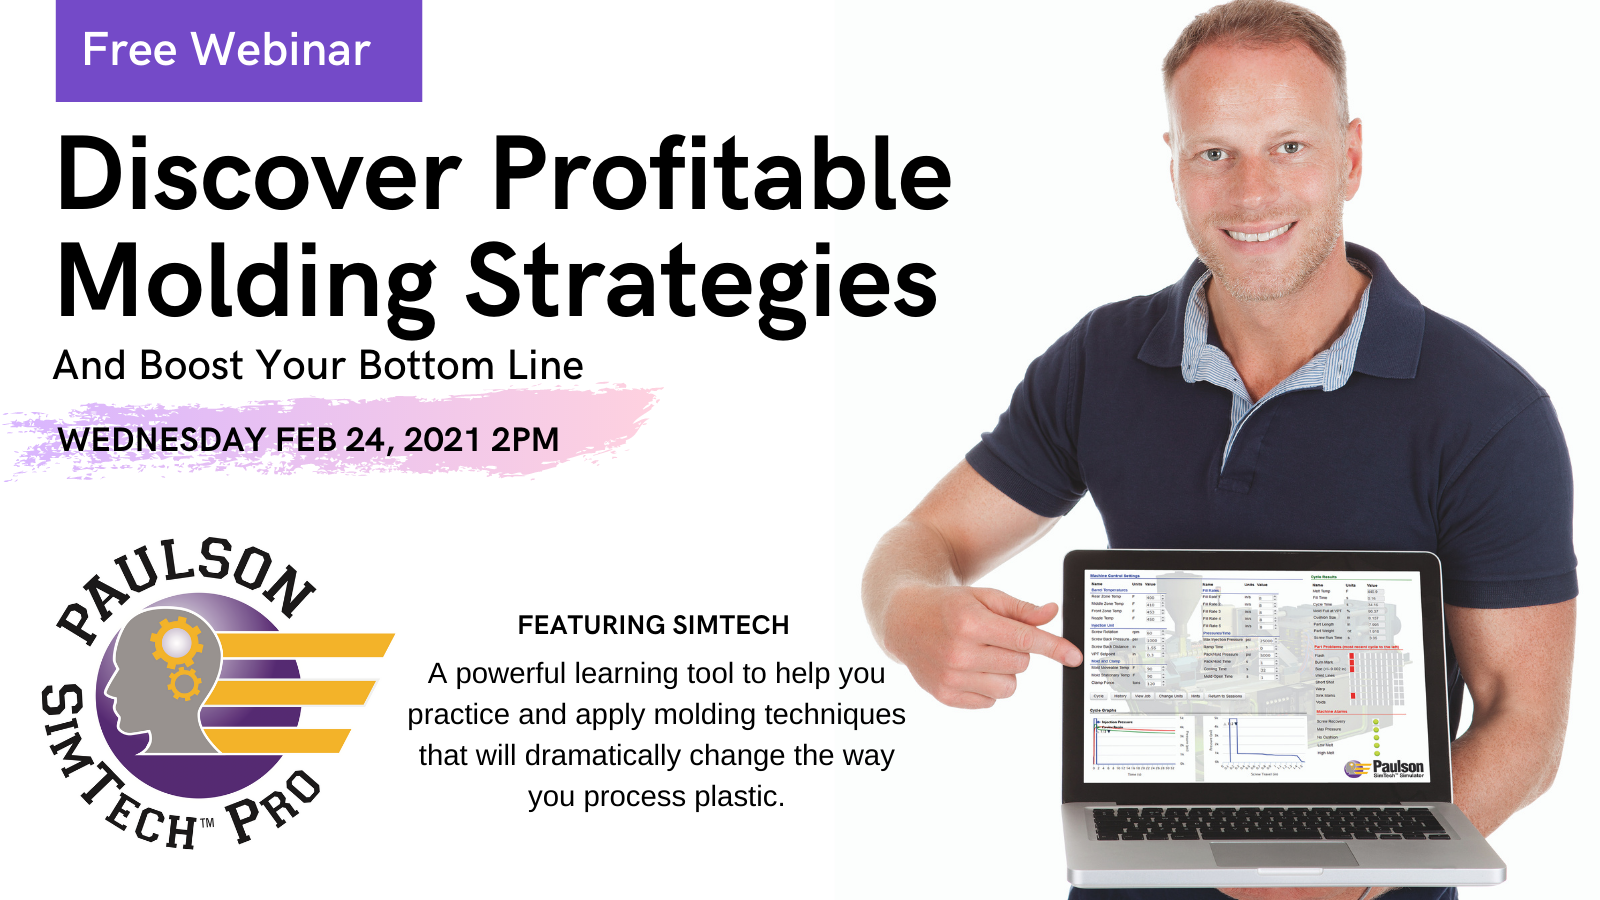 Webinar: Discover Molding Strategies to Boost Your Bottom Line